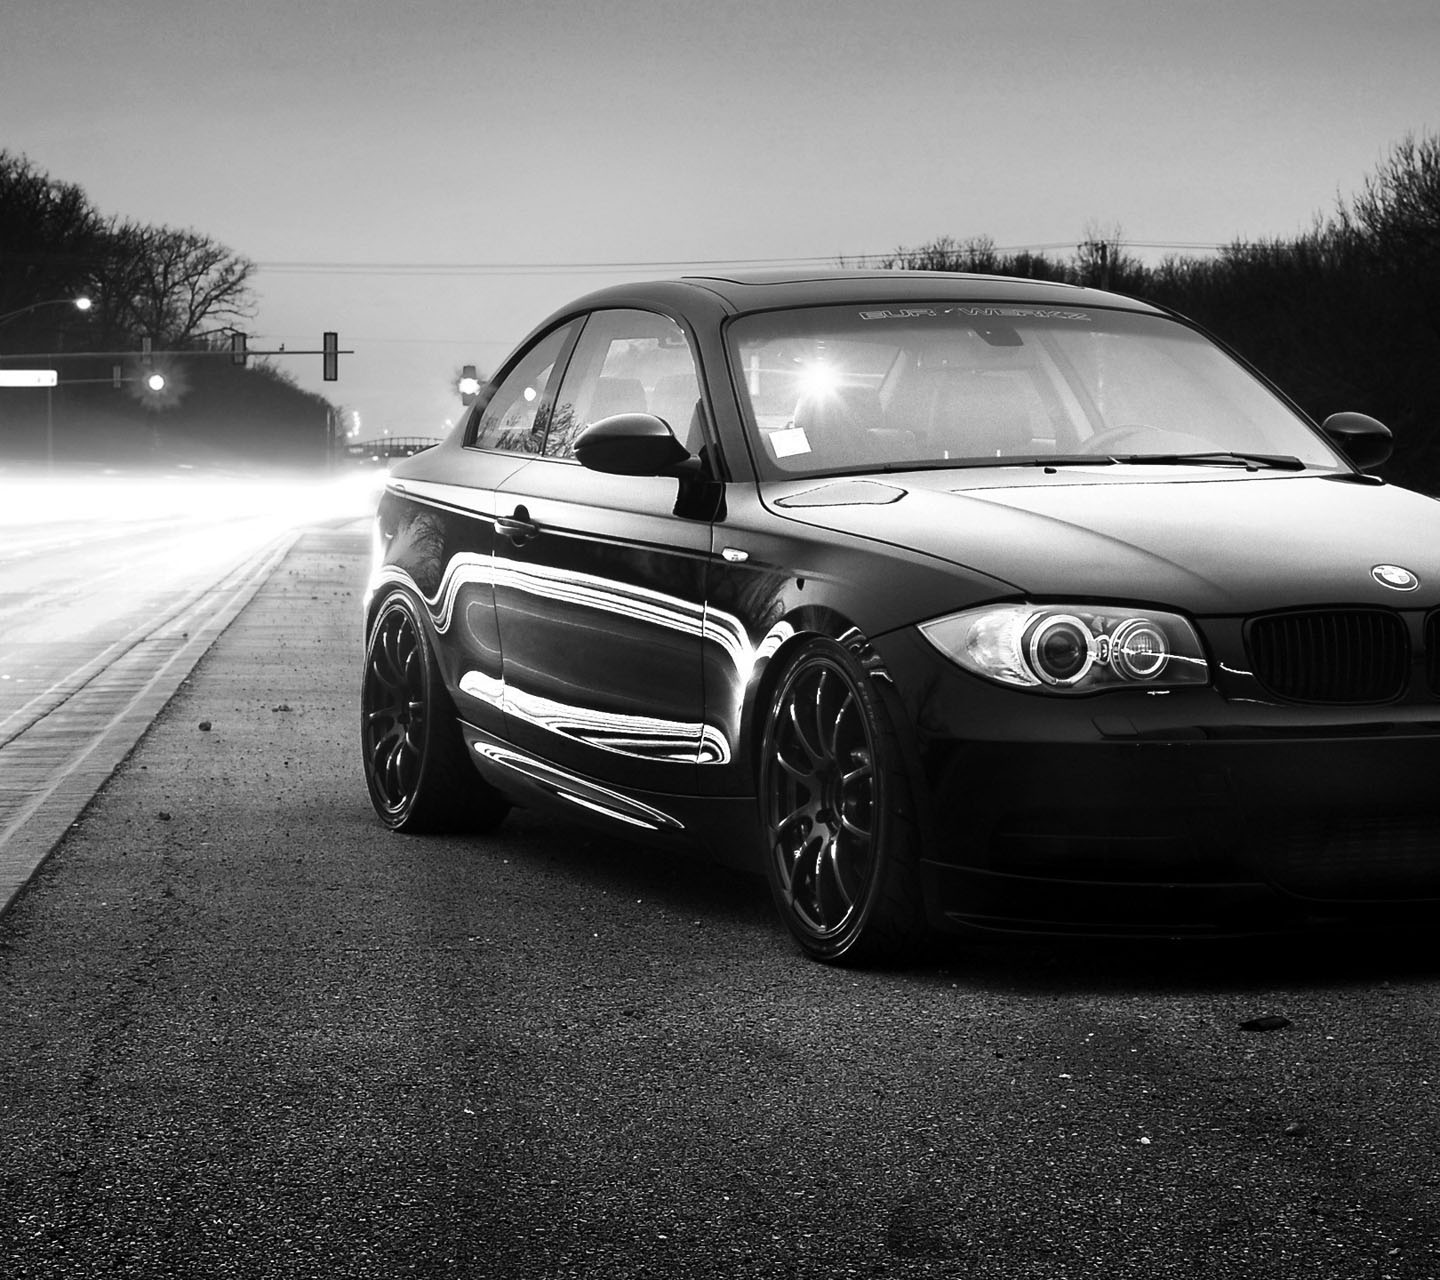 Full View and Download Black Bmw Wallpaper 3